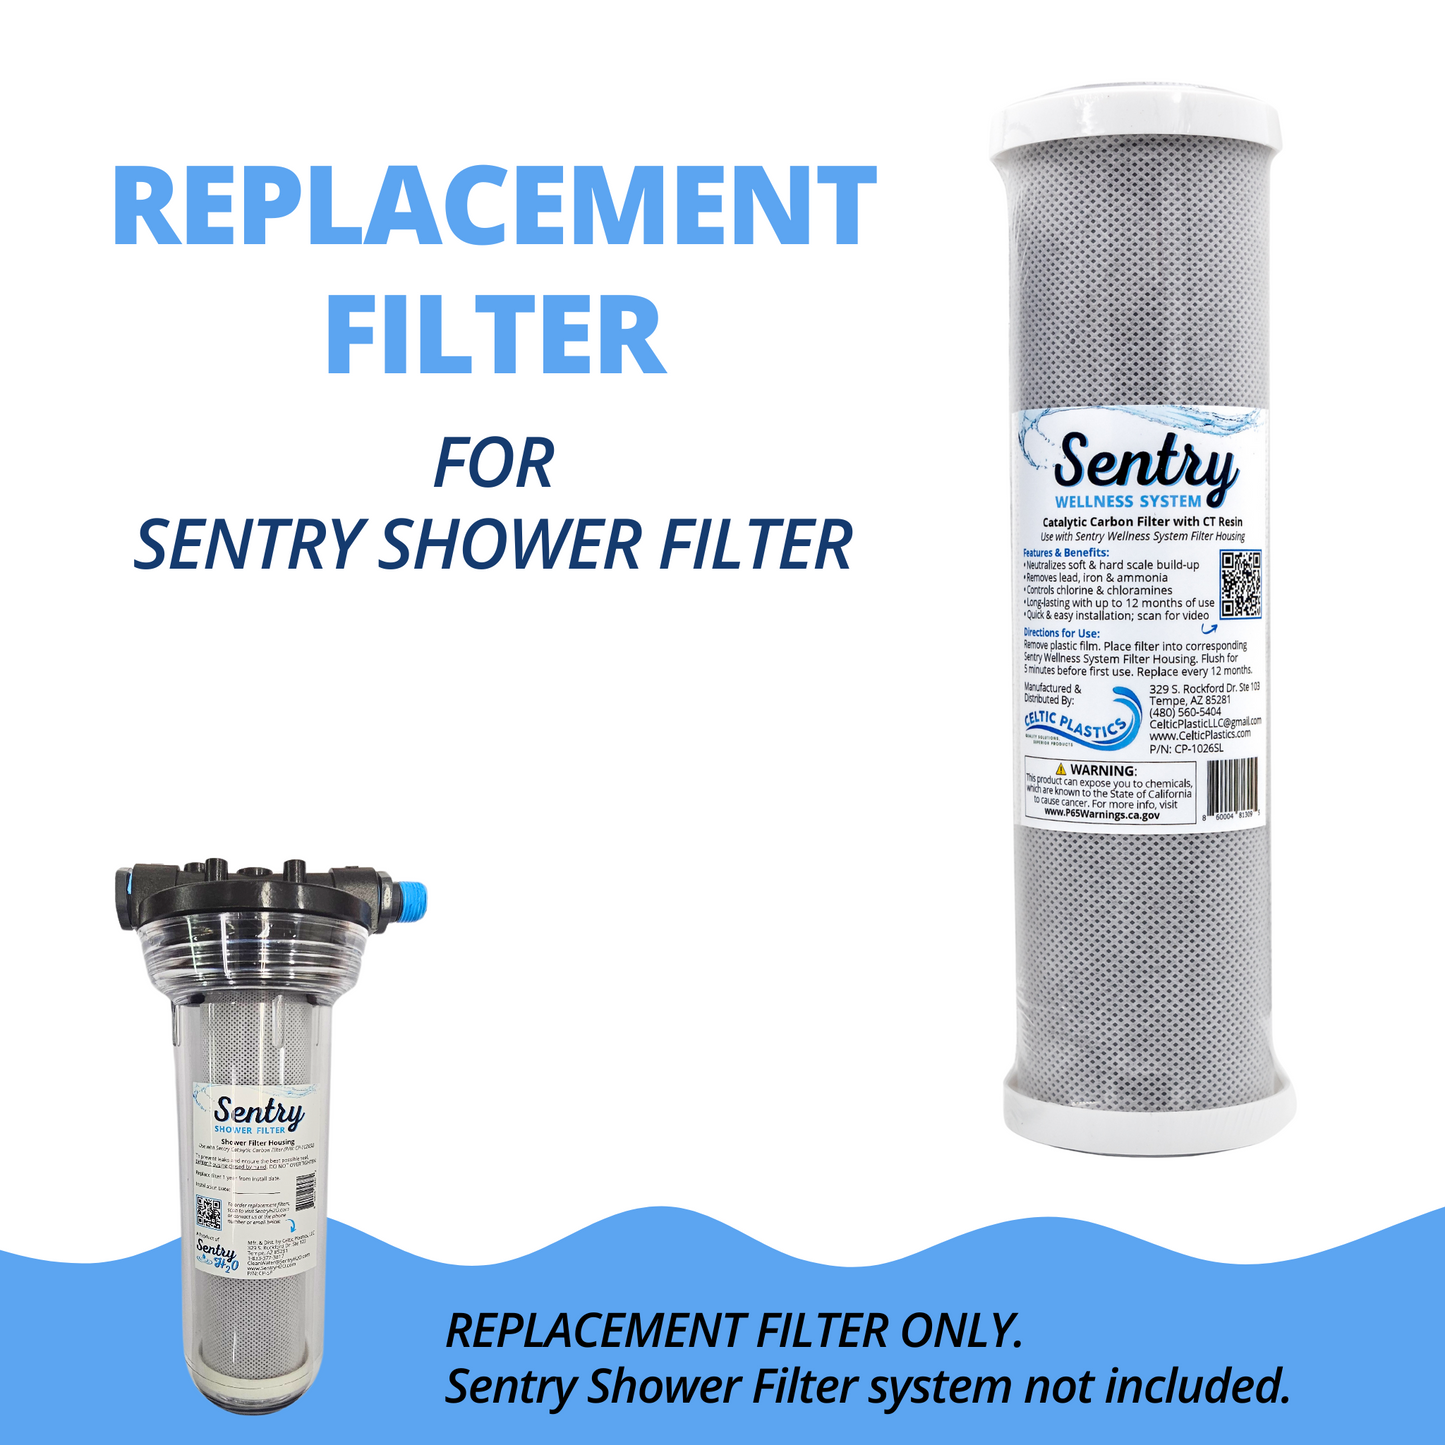 Replacement filter for Sentry shower filter